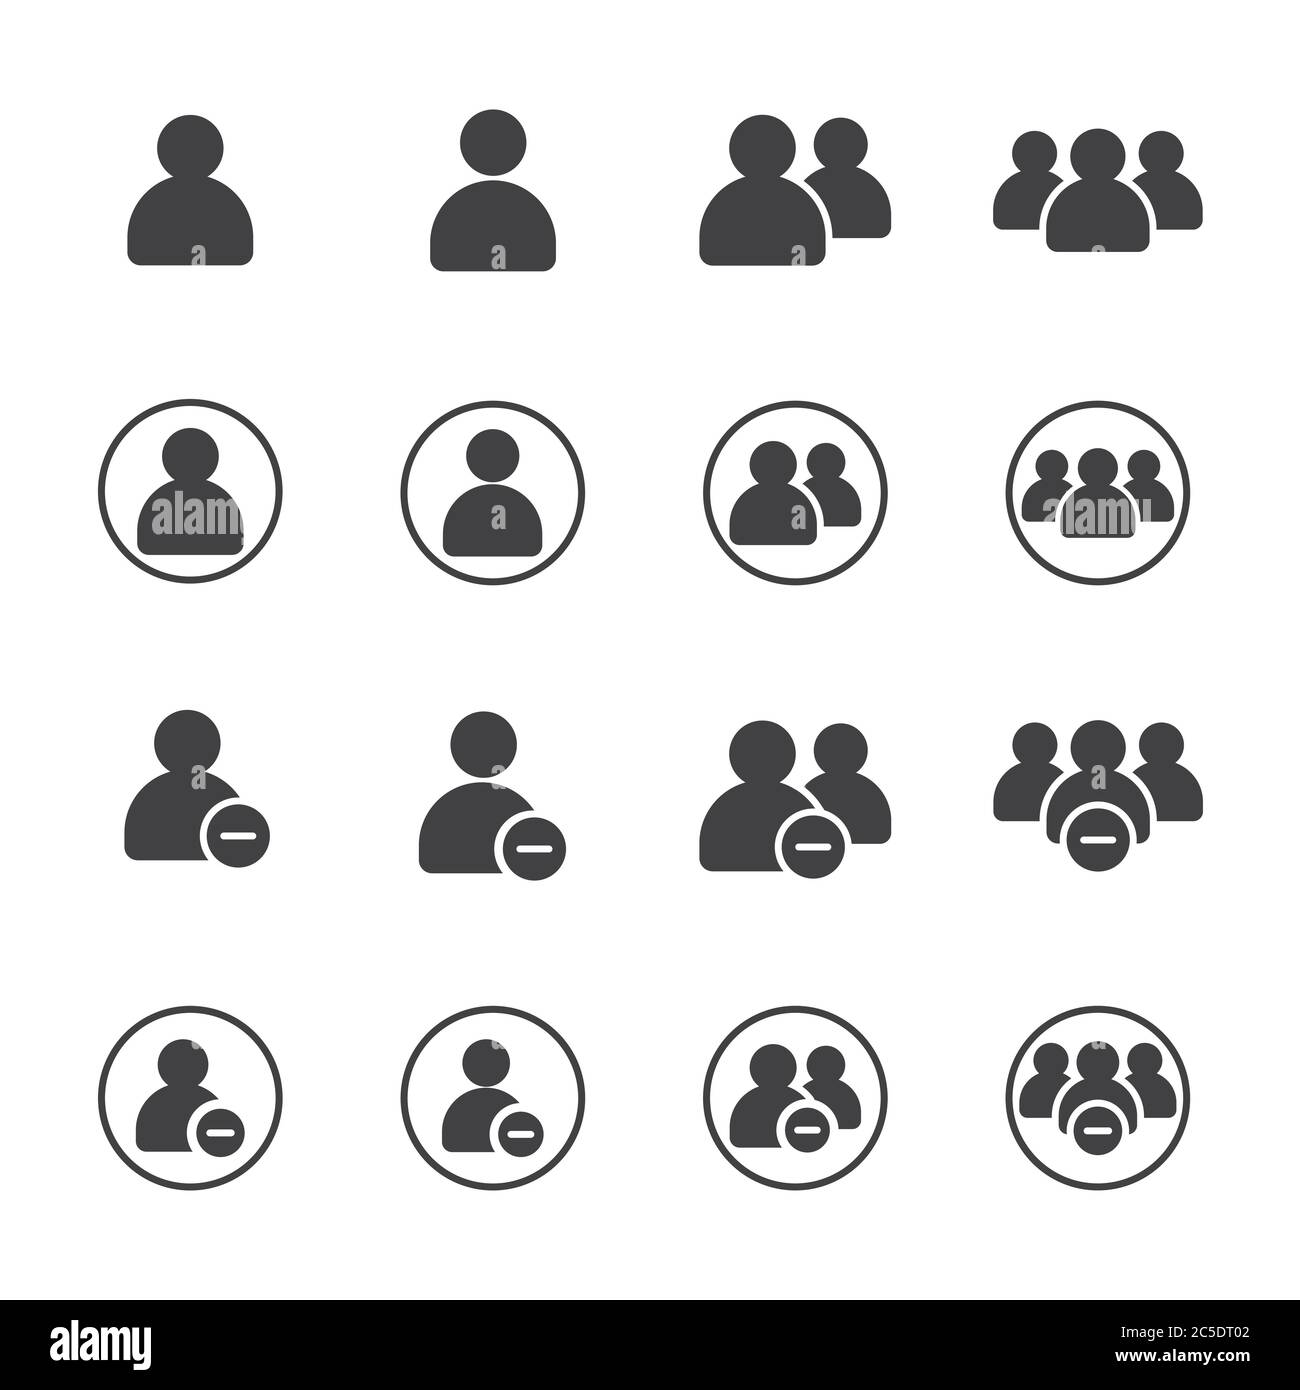 Simple Set of Business People Vector Glyph solid Icons with round. Contains such as group of people, delete, decrease, ban, cancle, fire, exclude, min Stock Vector